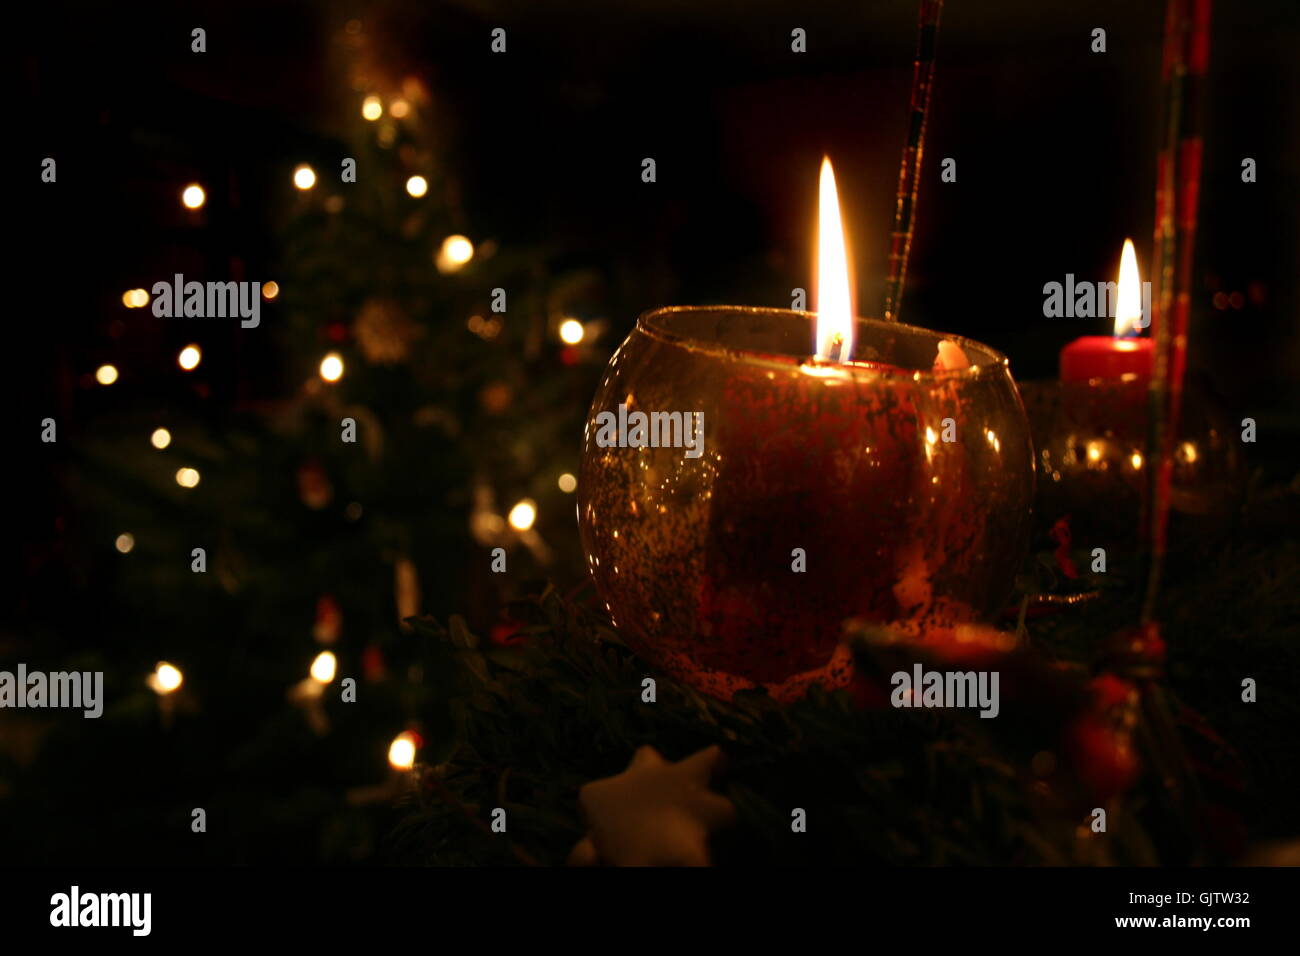 tree candle advent Stock Photo